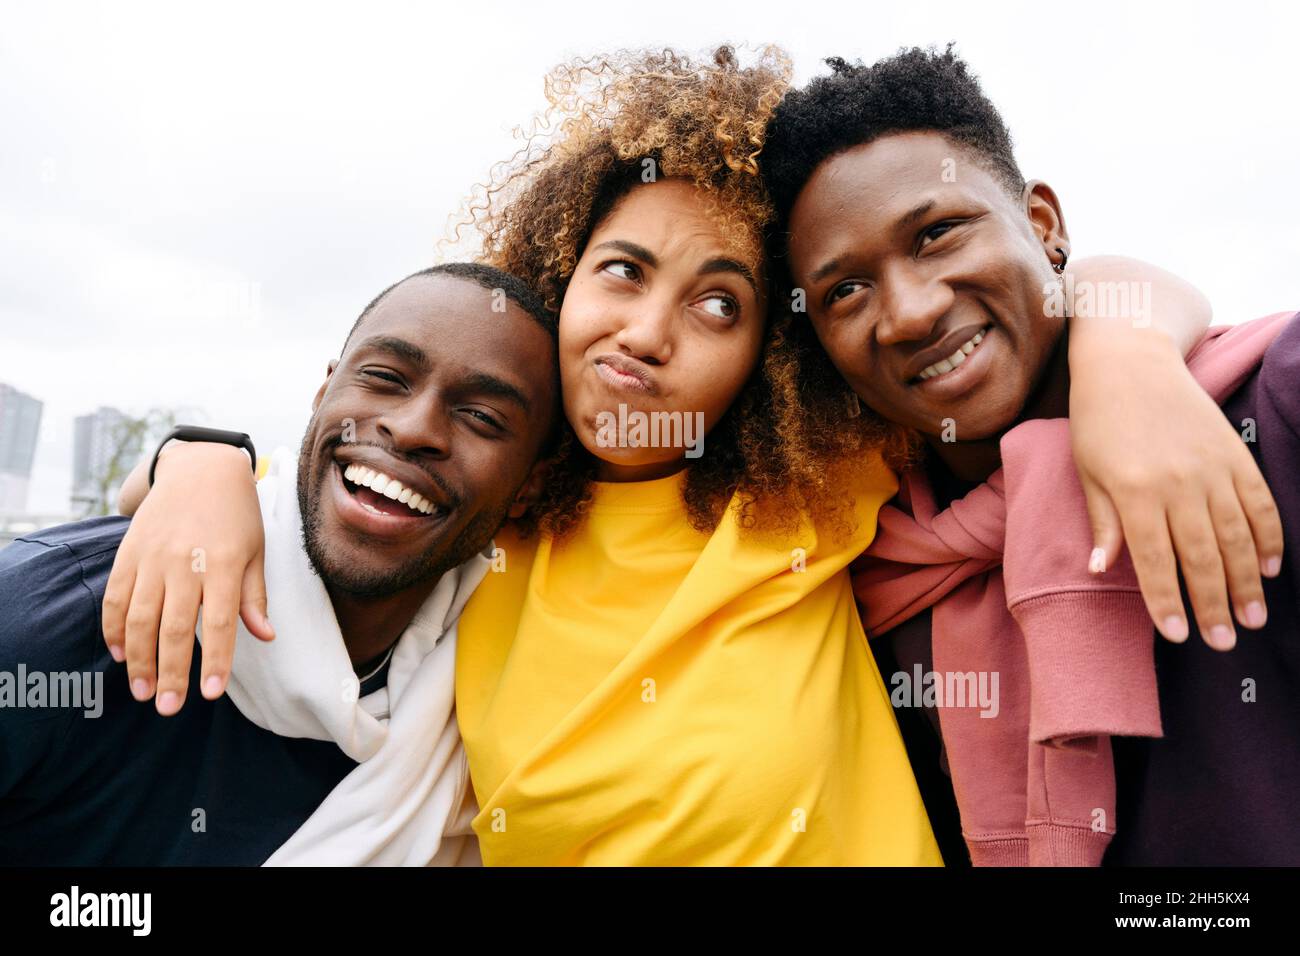 Woman making facial expression with smiling friends in front of clear sky Stock Photo